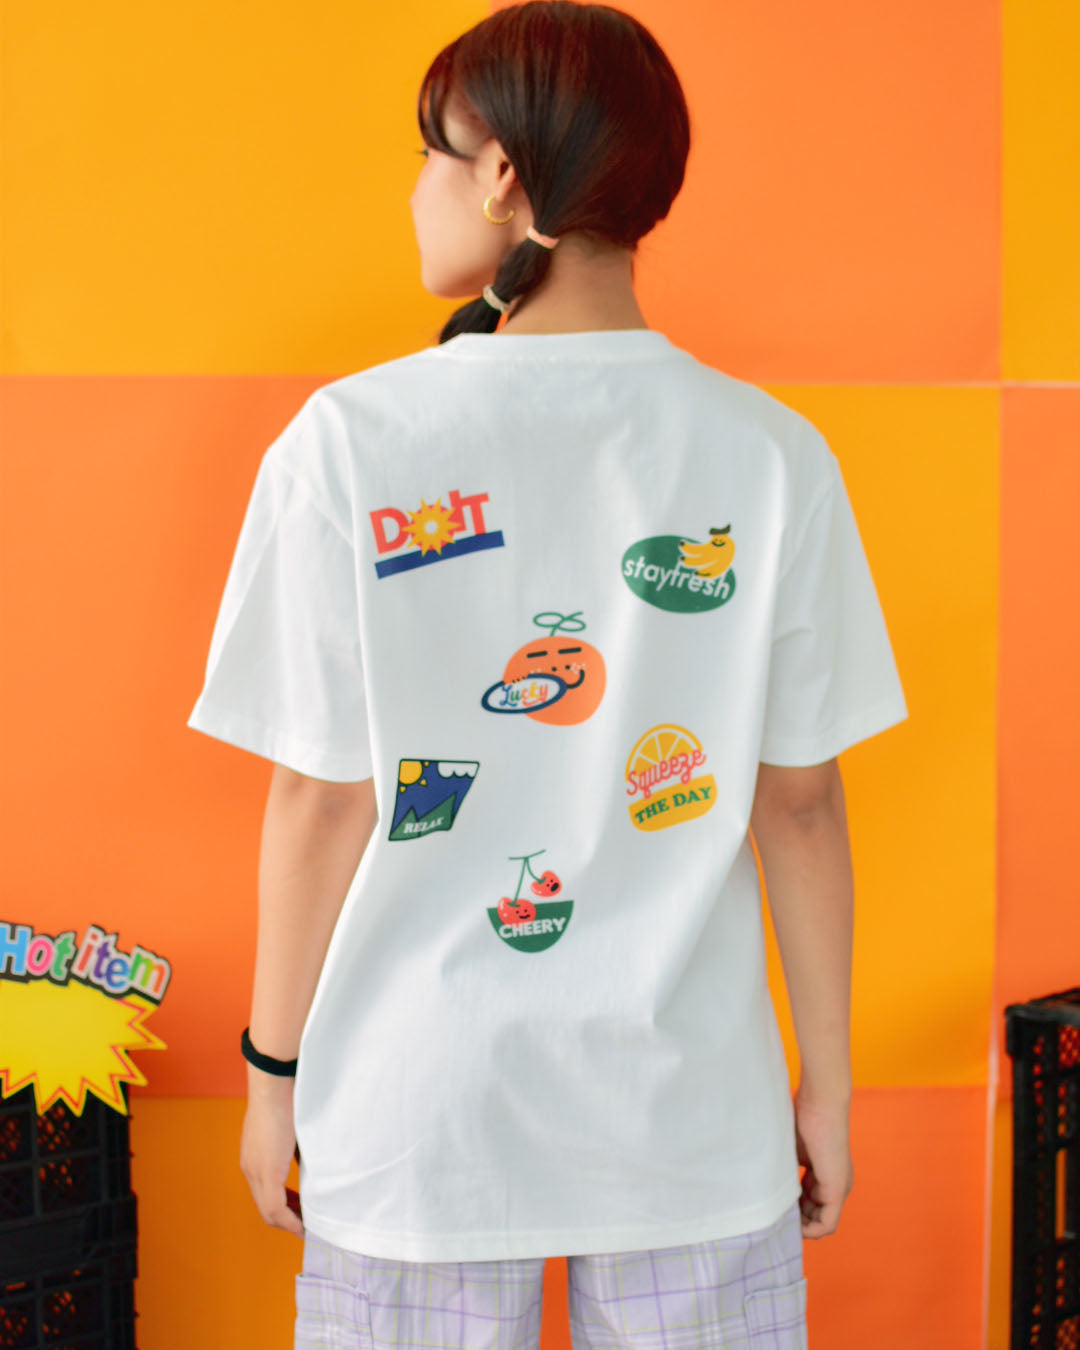 Lucky The Good Labels Oversized Tee in White